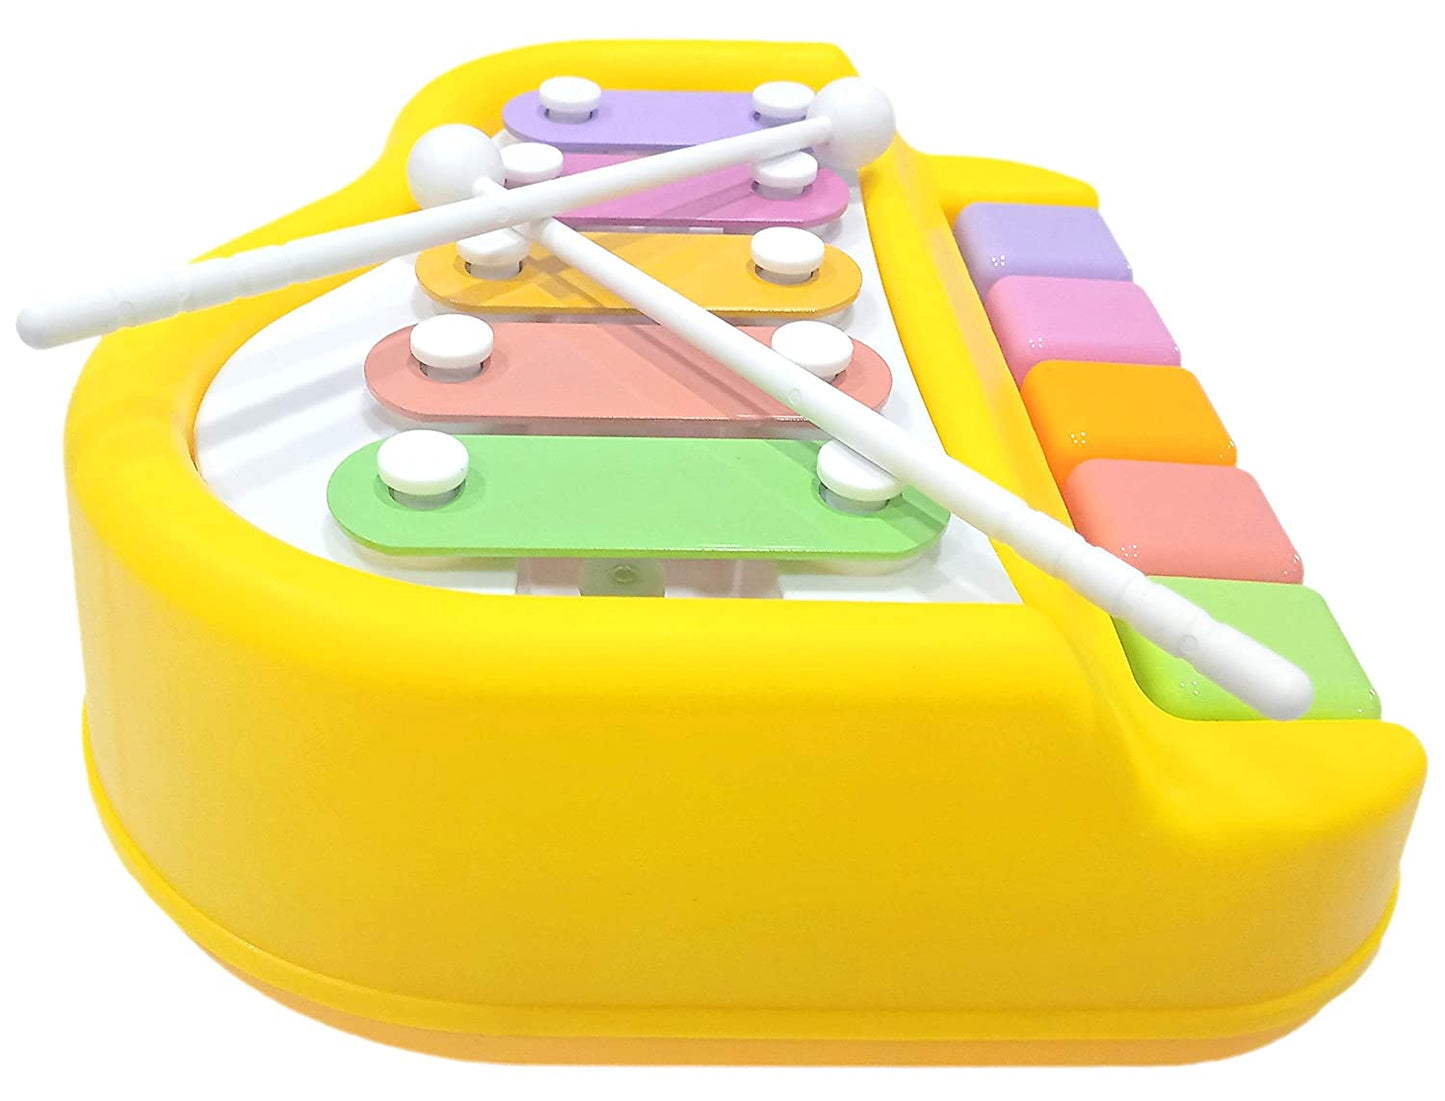 2 in 1 Xylophone and Piano Toy with Colorful Keys for Toddlers and Kids